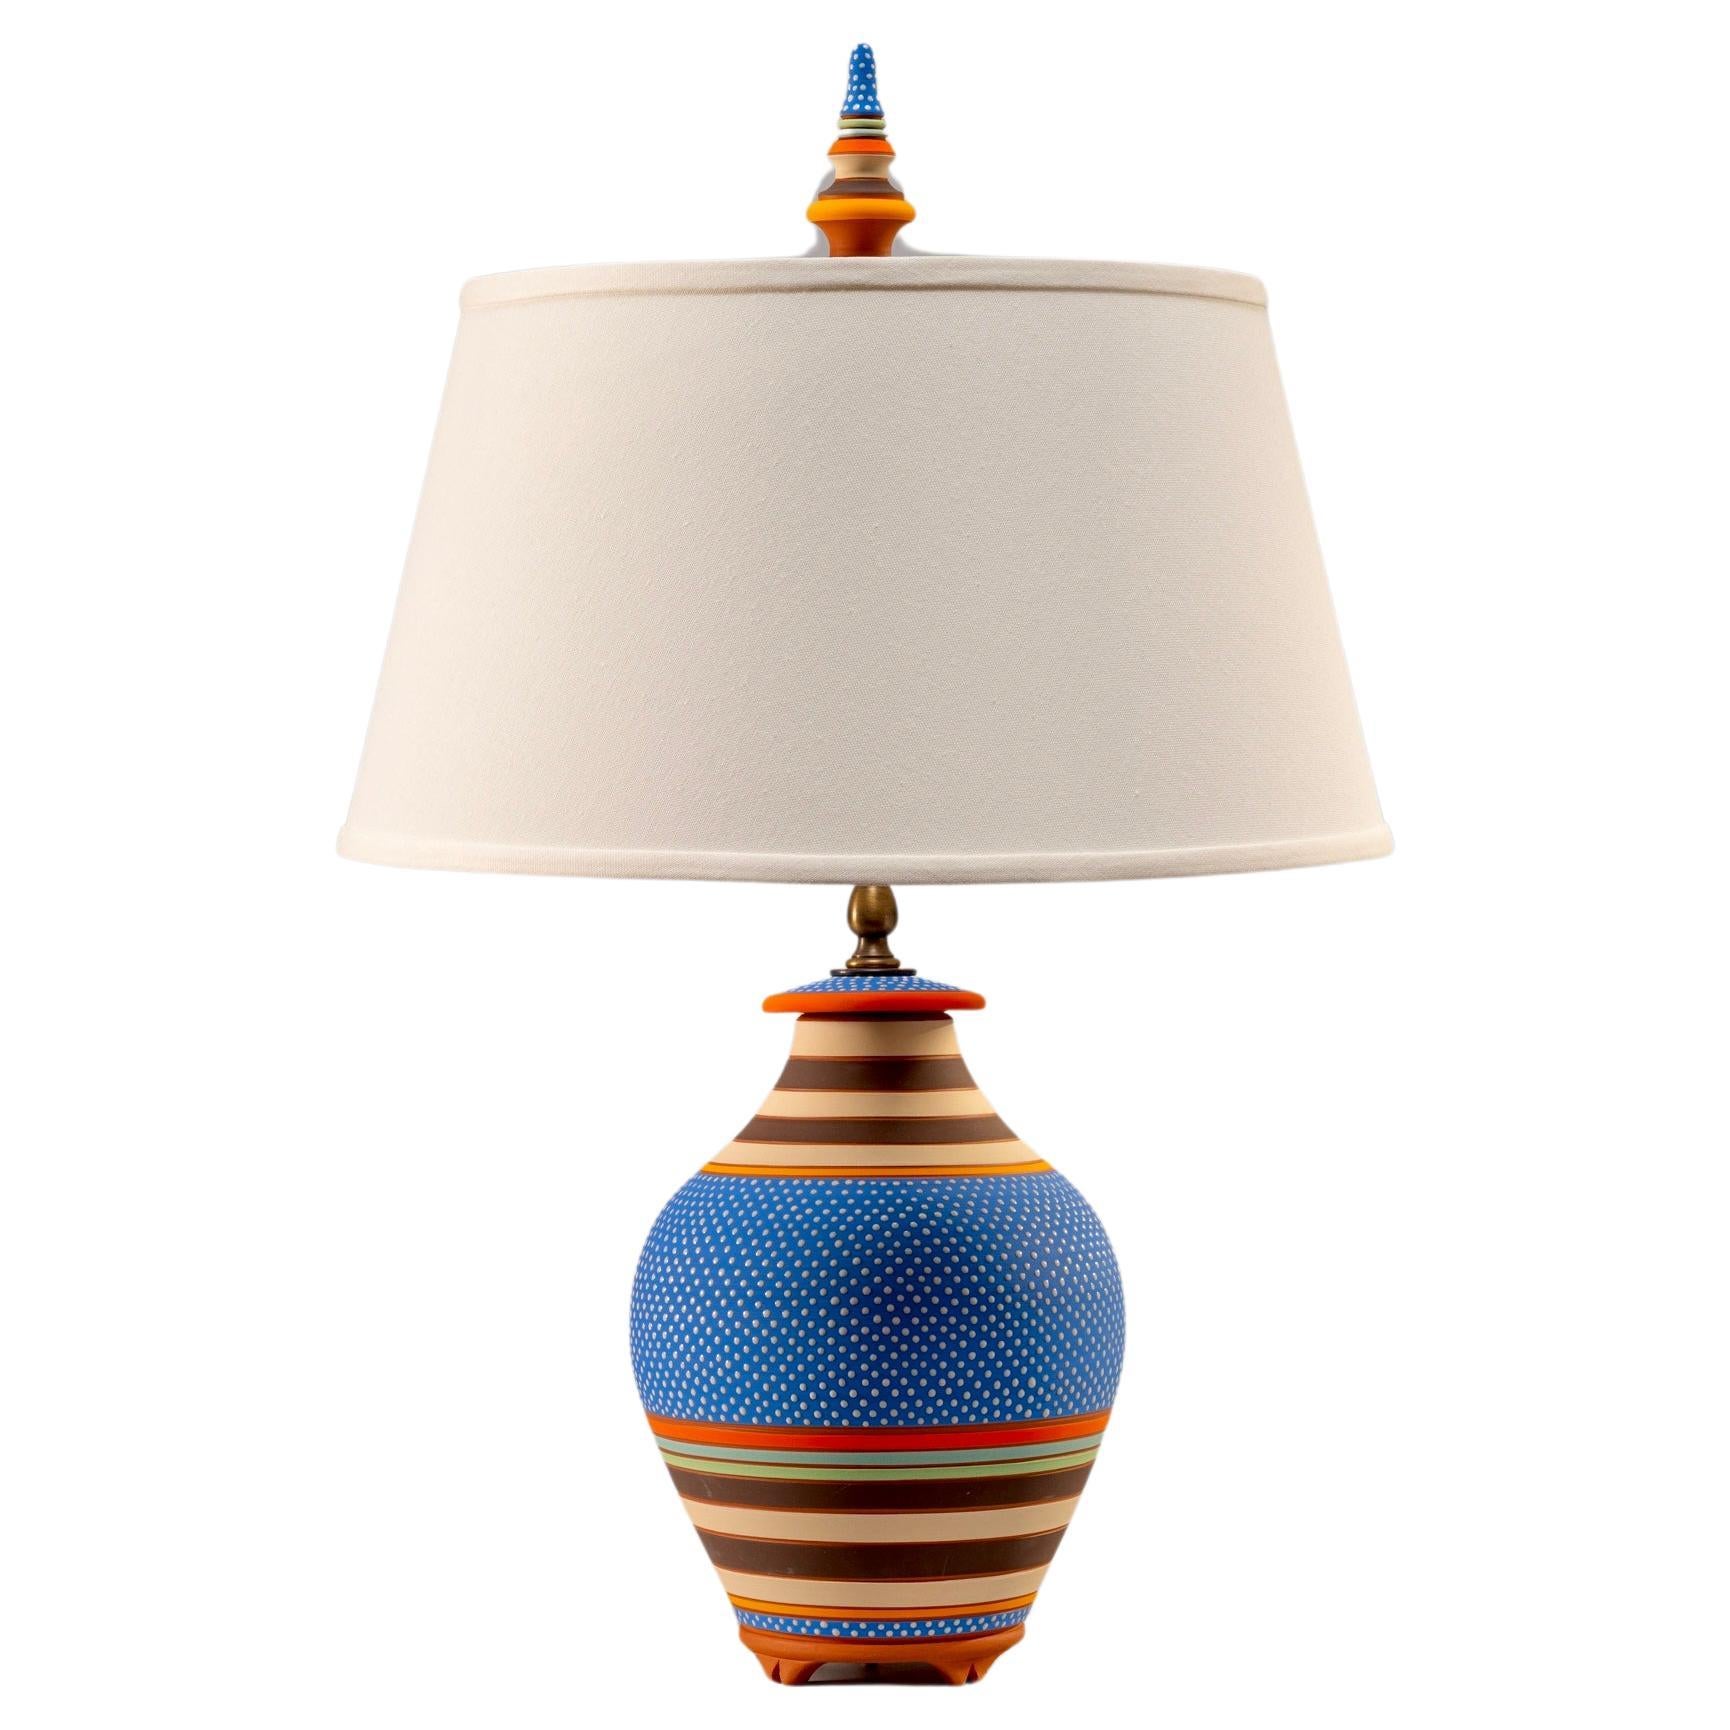 SAPPHIRE, Hand-thrown, Hand-painted Terracotta Table Lamp For Sale